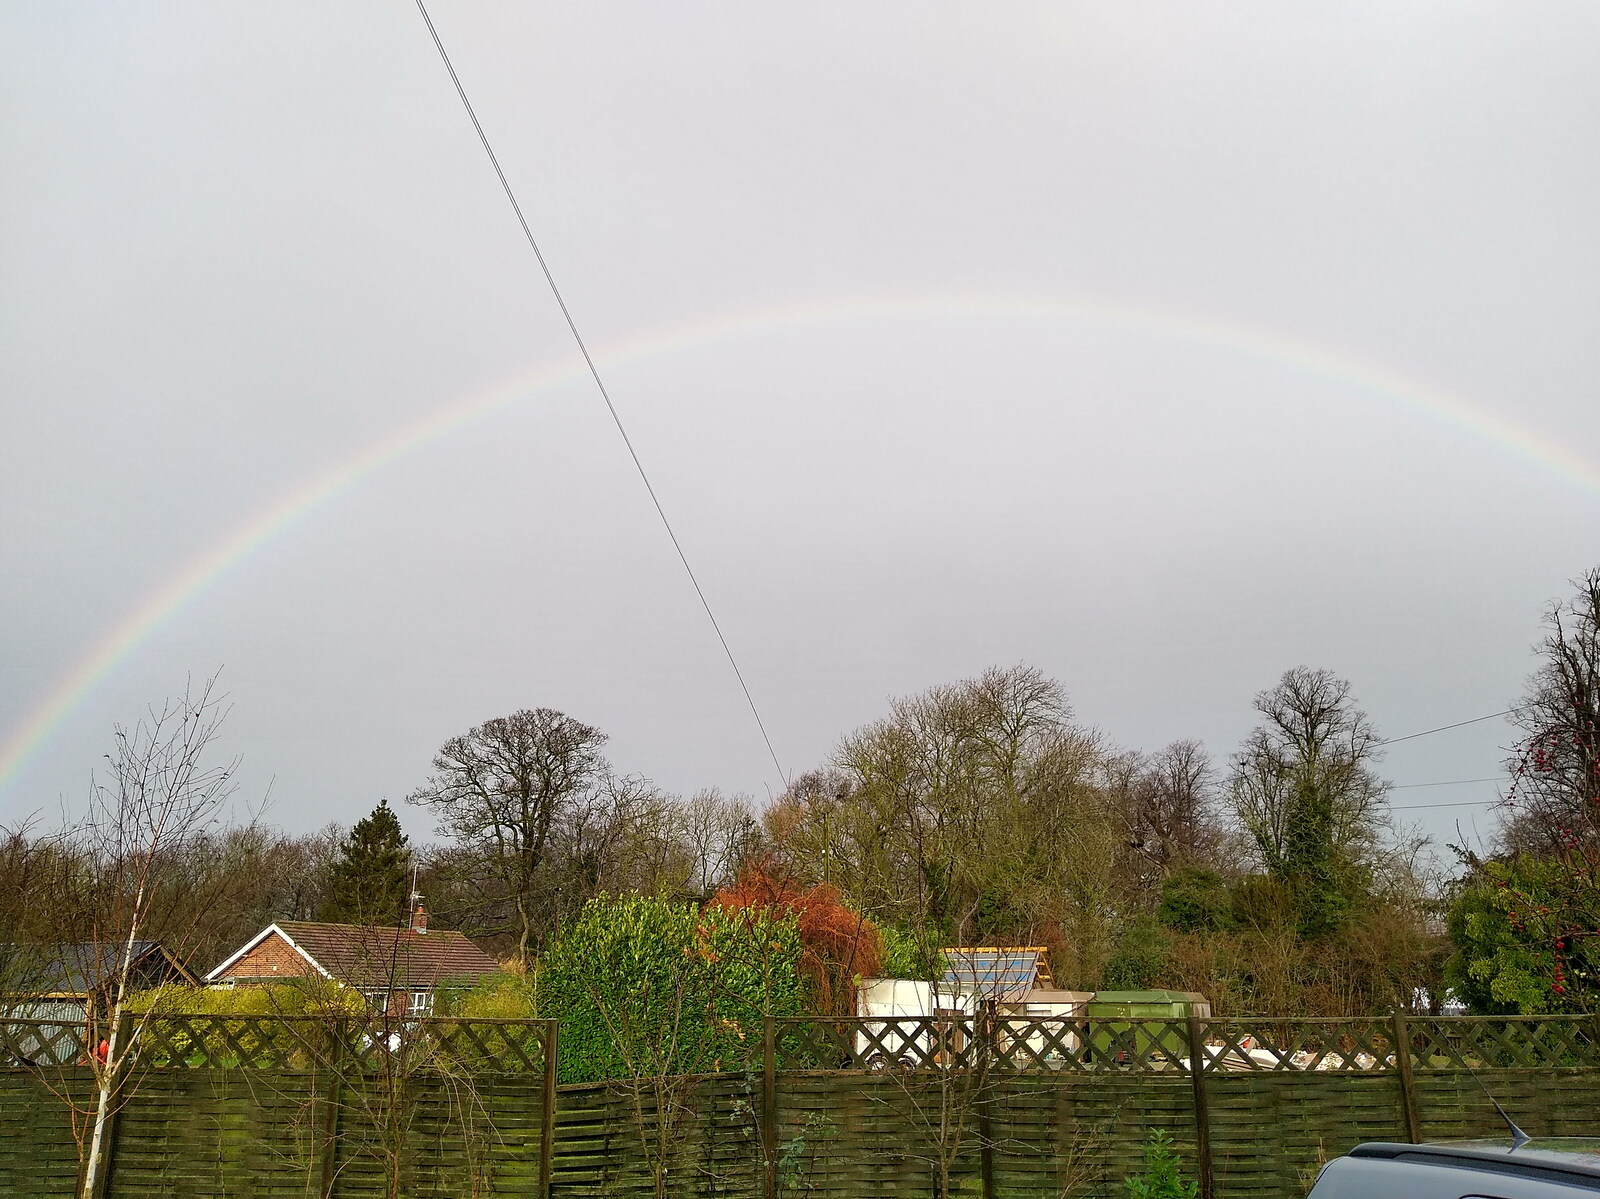 There's a rainbow over the Oaksmere from Dinner at the Oaksmere and a Ride to Eye, Suffolk - 5th January 2022